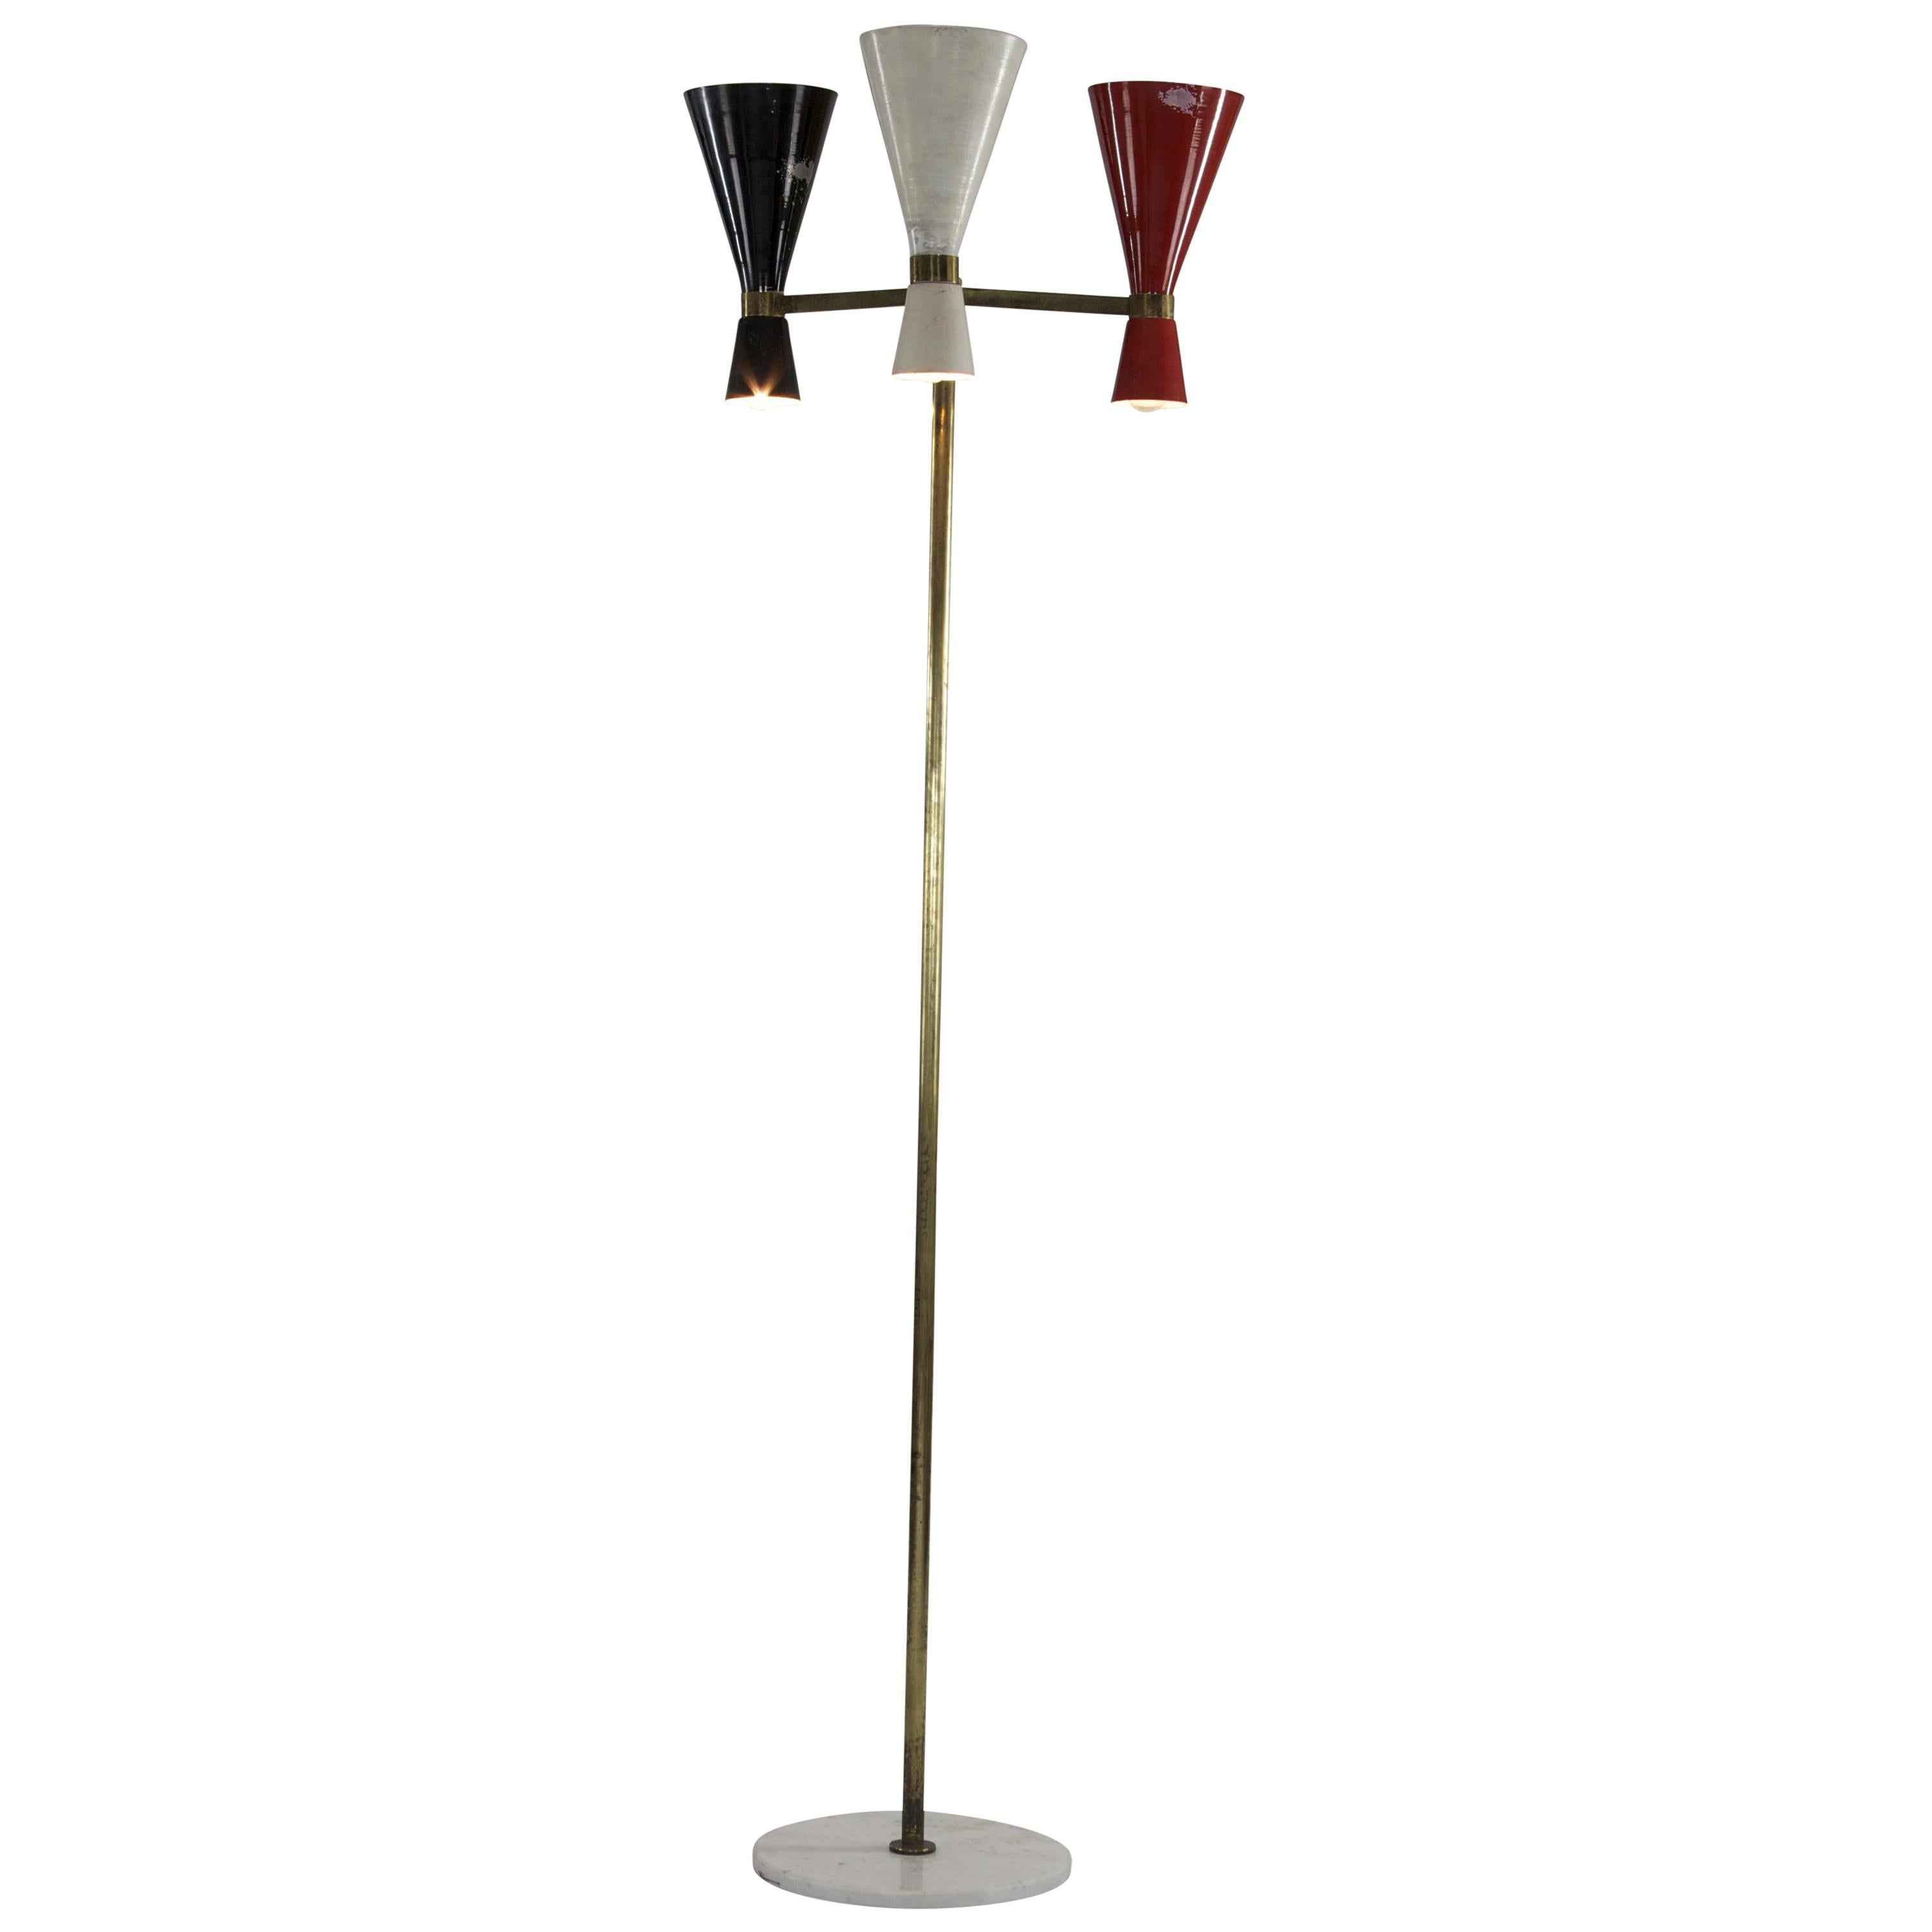 Italian Floor Lamp with Red White Black Colored Metal Shades, Marble Base, 1950s For Sale